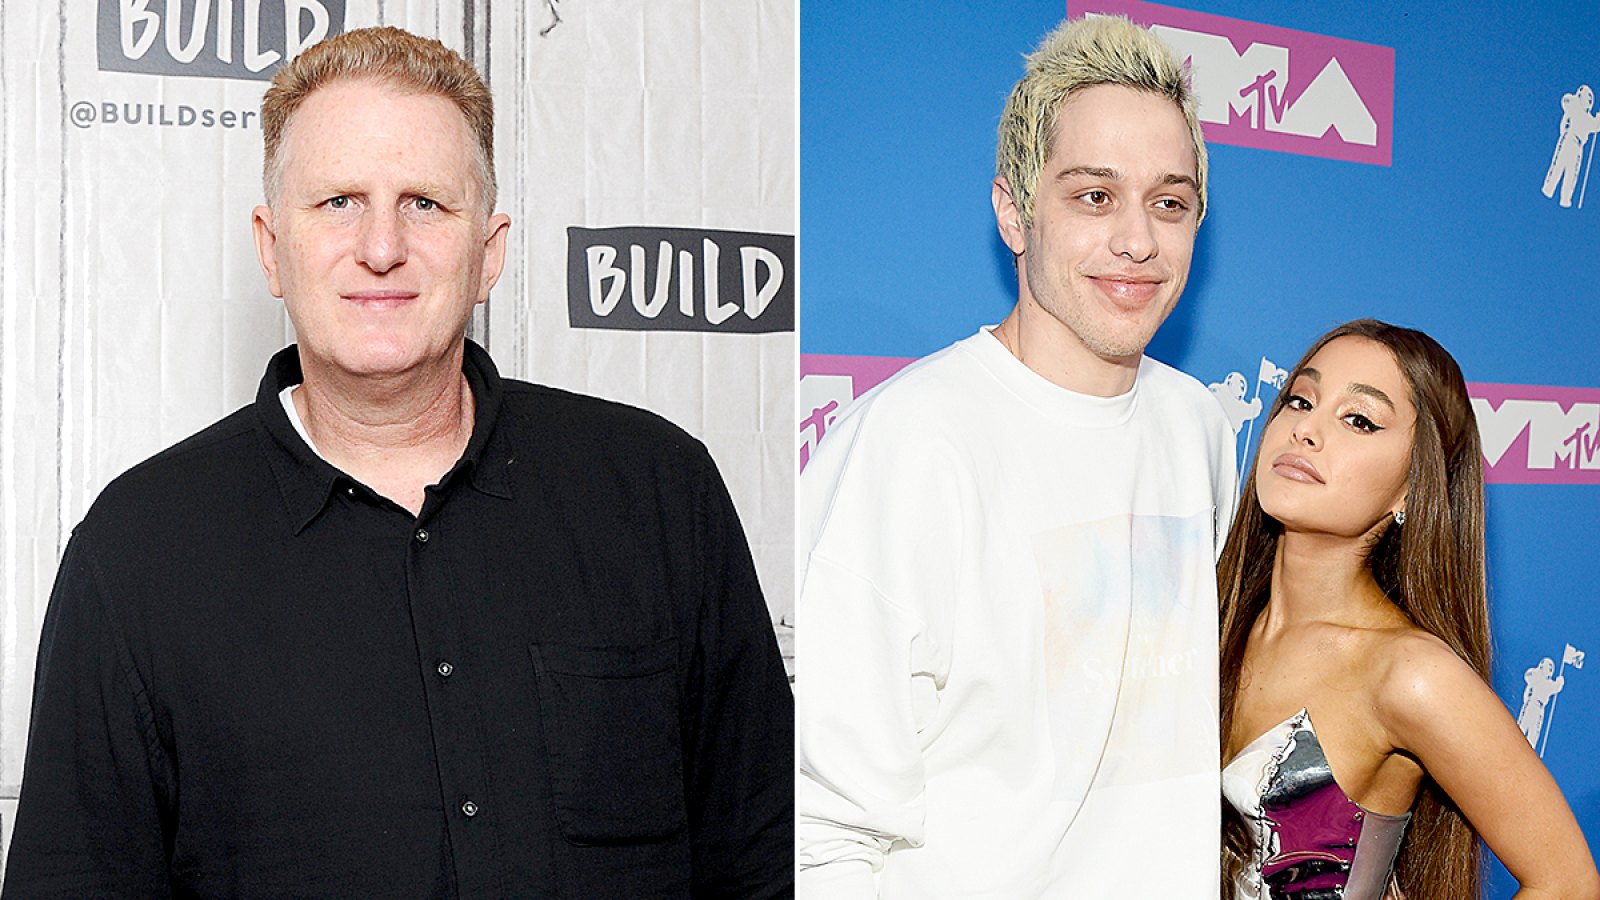 Michael-Rapaport-Photoshops-His-Face-on-Pete-Davidson-With-Ariana-Grande